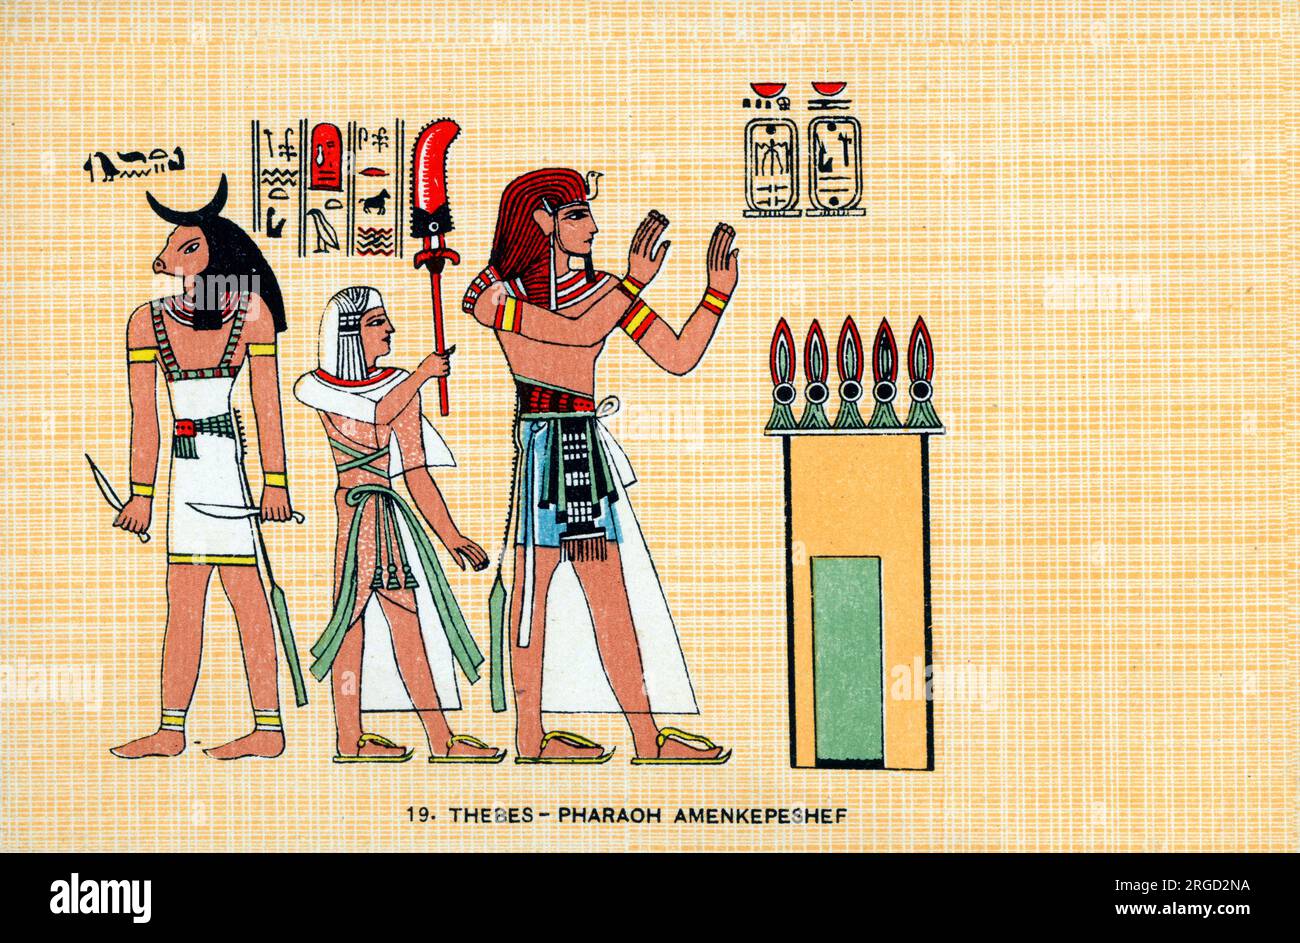 Ancient Egypt - Thebes - Amun-her-khepeshef, the firstborn son of Pharaoh Ramesses II and Queen Nefertari. Stock Photo